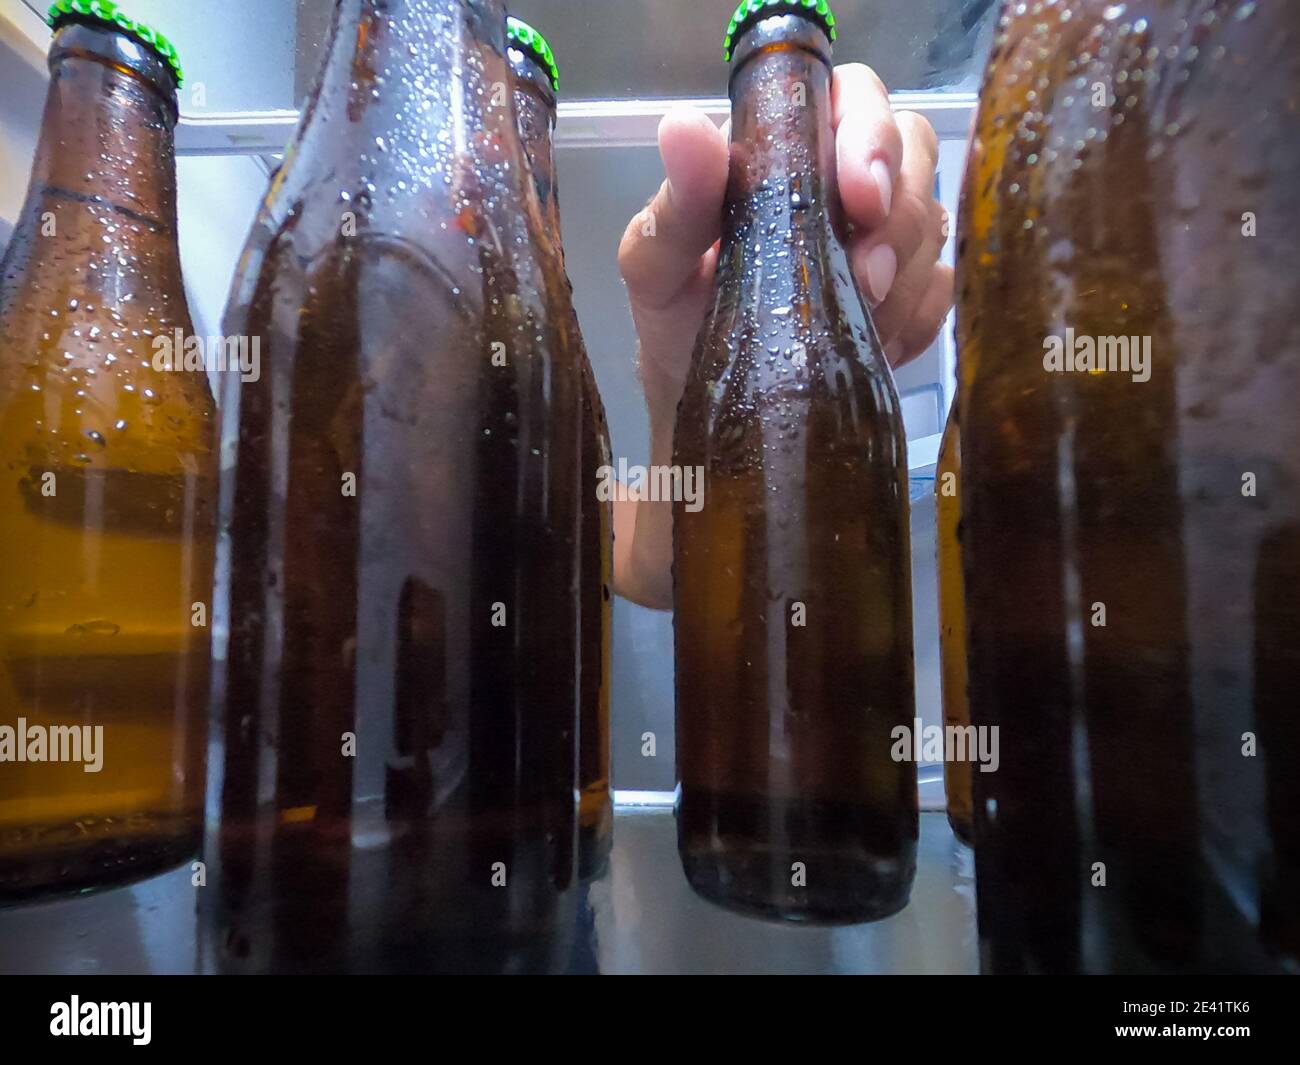 https://c8.alamy.com/comp/2E41TK6/a-hand-picking-up-an-ice-cold-beer-bottle-from-the-fridge-beer-concept-2E41TK6.jpg